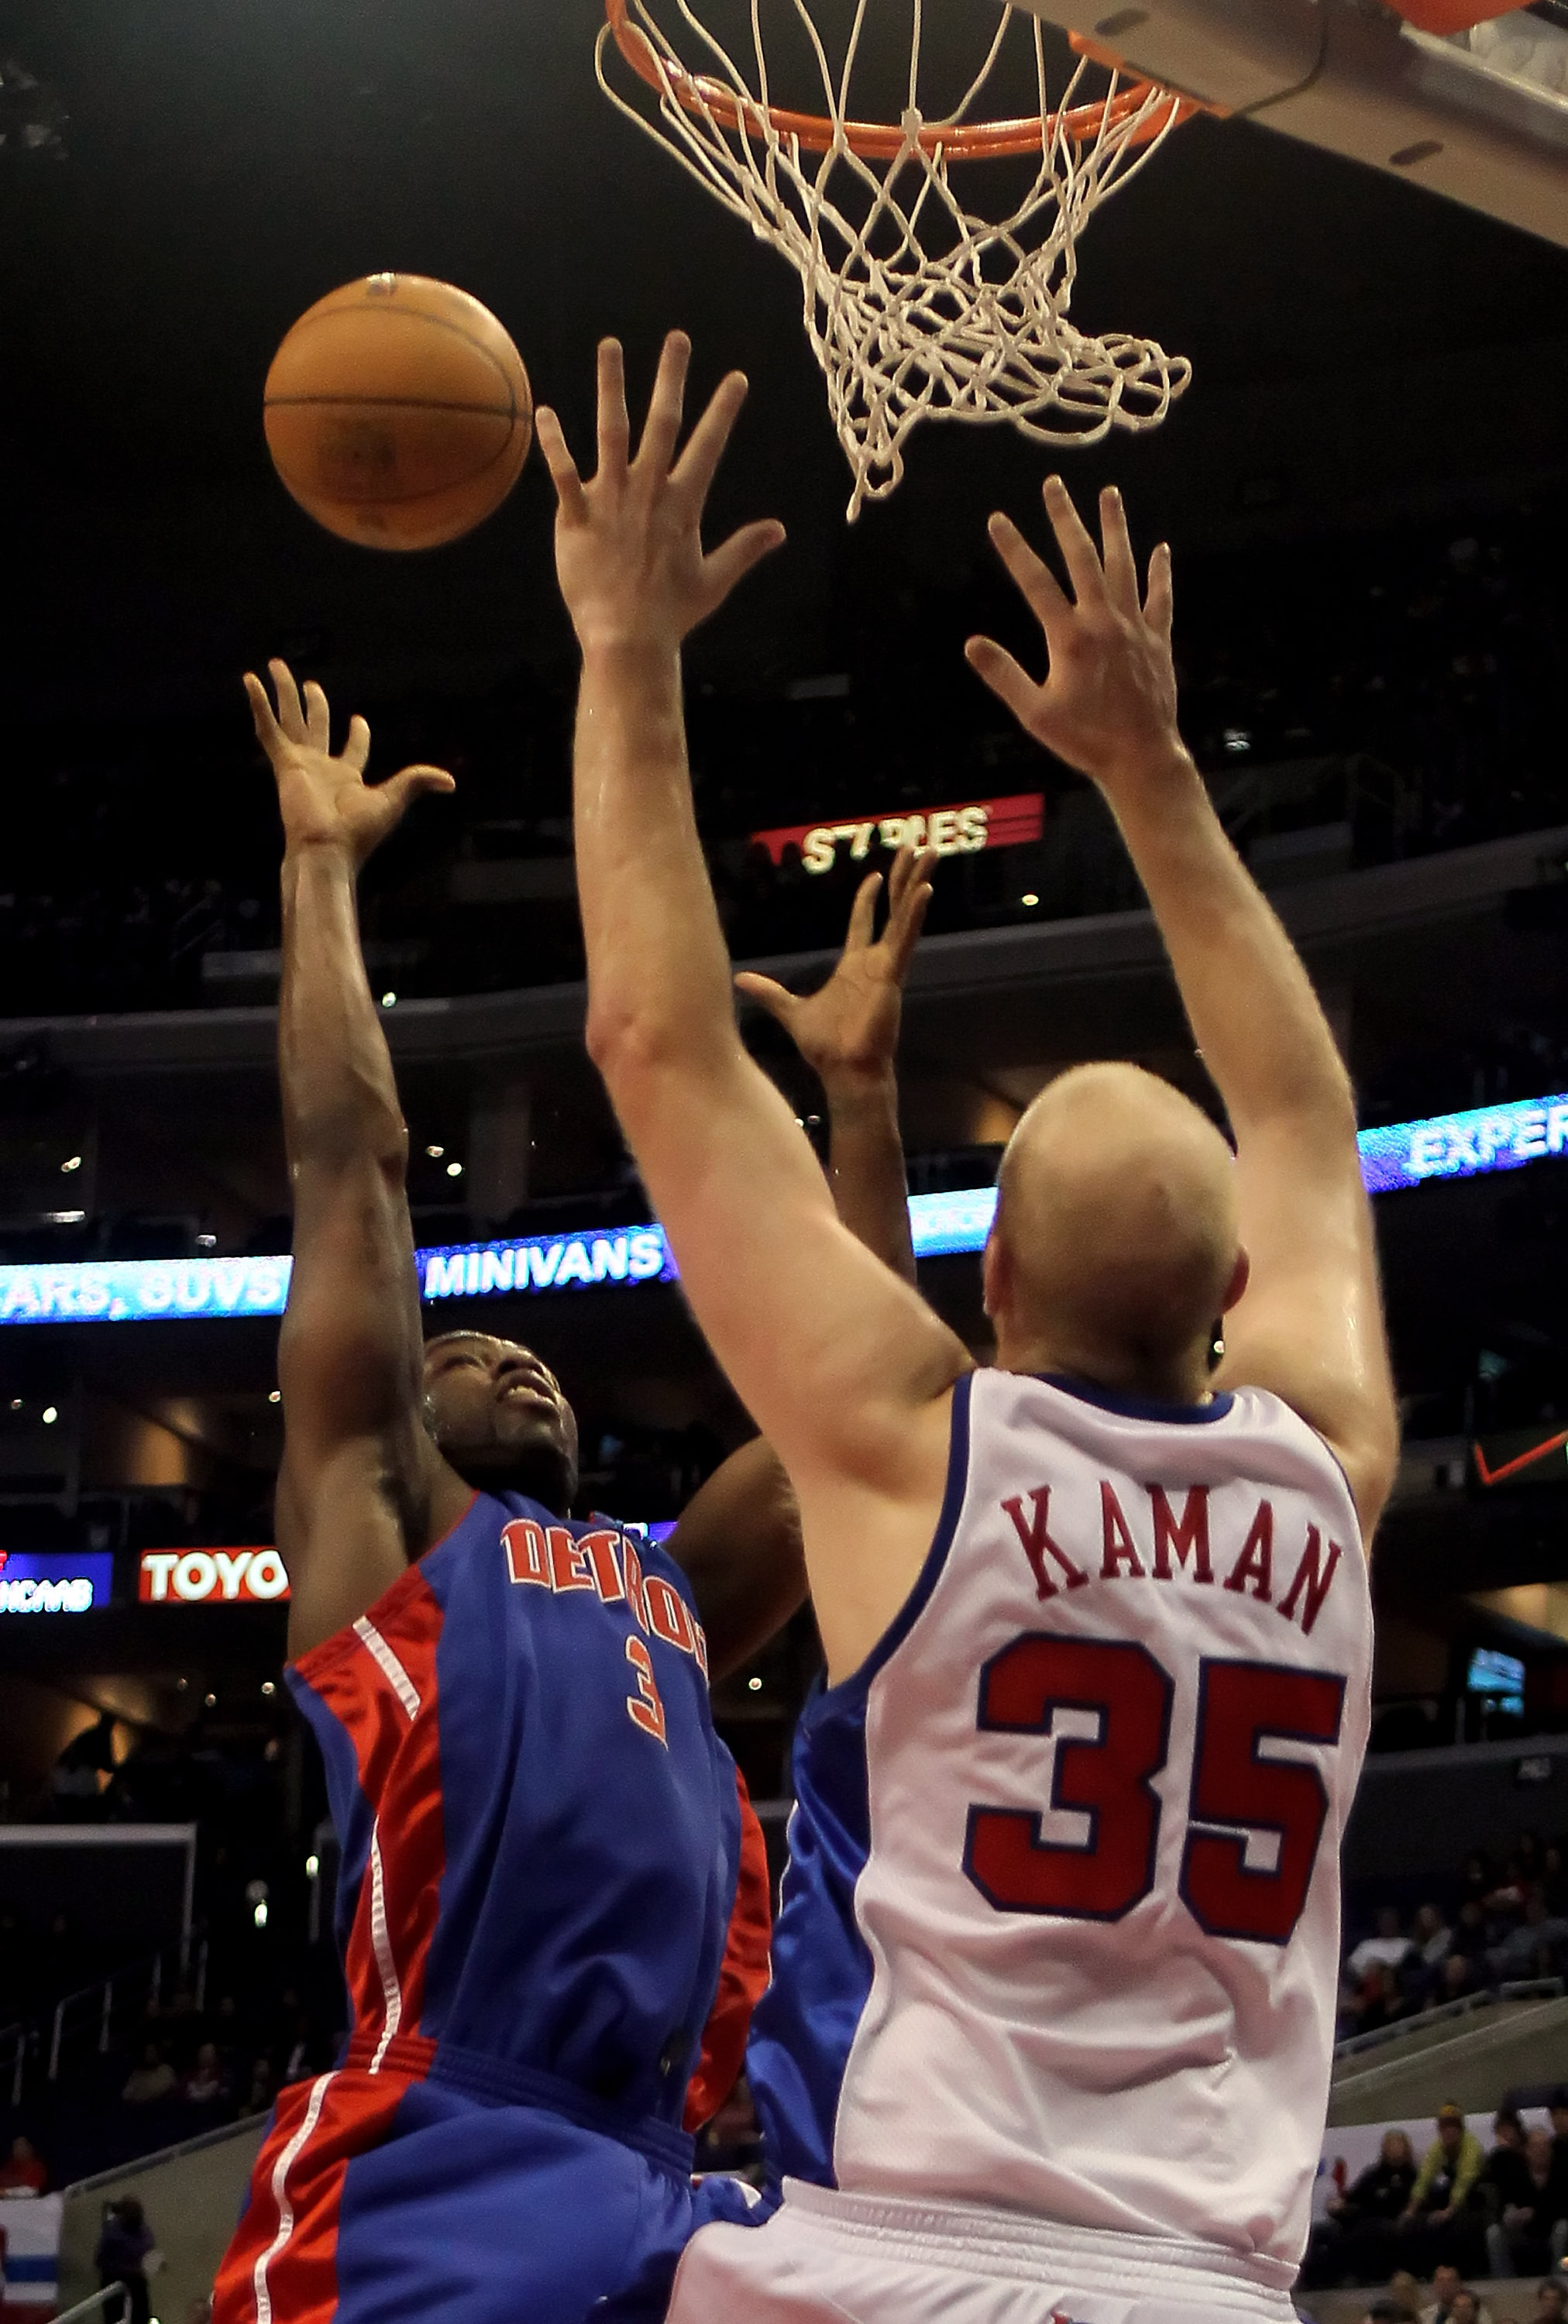 LOS ANGELES, CA - FEBRUARY 24:  Rodney Stuckey #3 of the Detroit Pistons shoots over Chris Kaman #35 of the Los Angeles Clippers during the first half at Staples Center on February 24, 2010 in Los Angeles, California. NOTE TO USER: User expressly acknowle